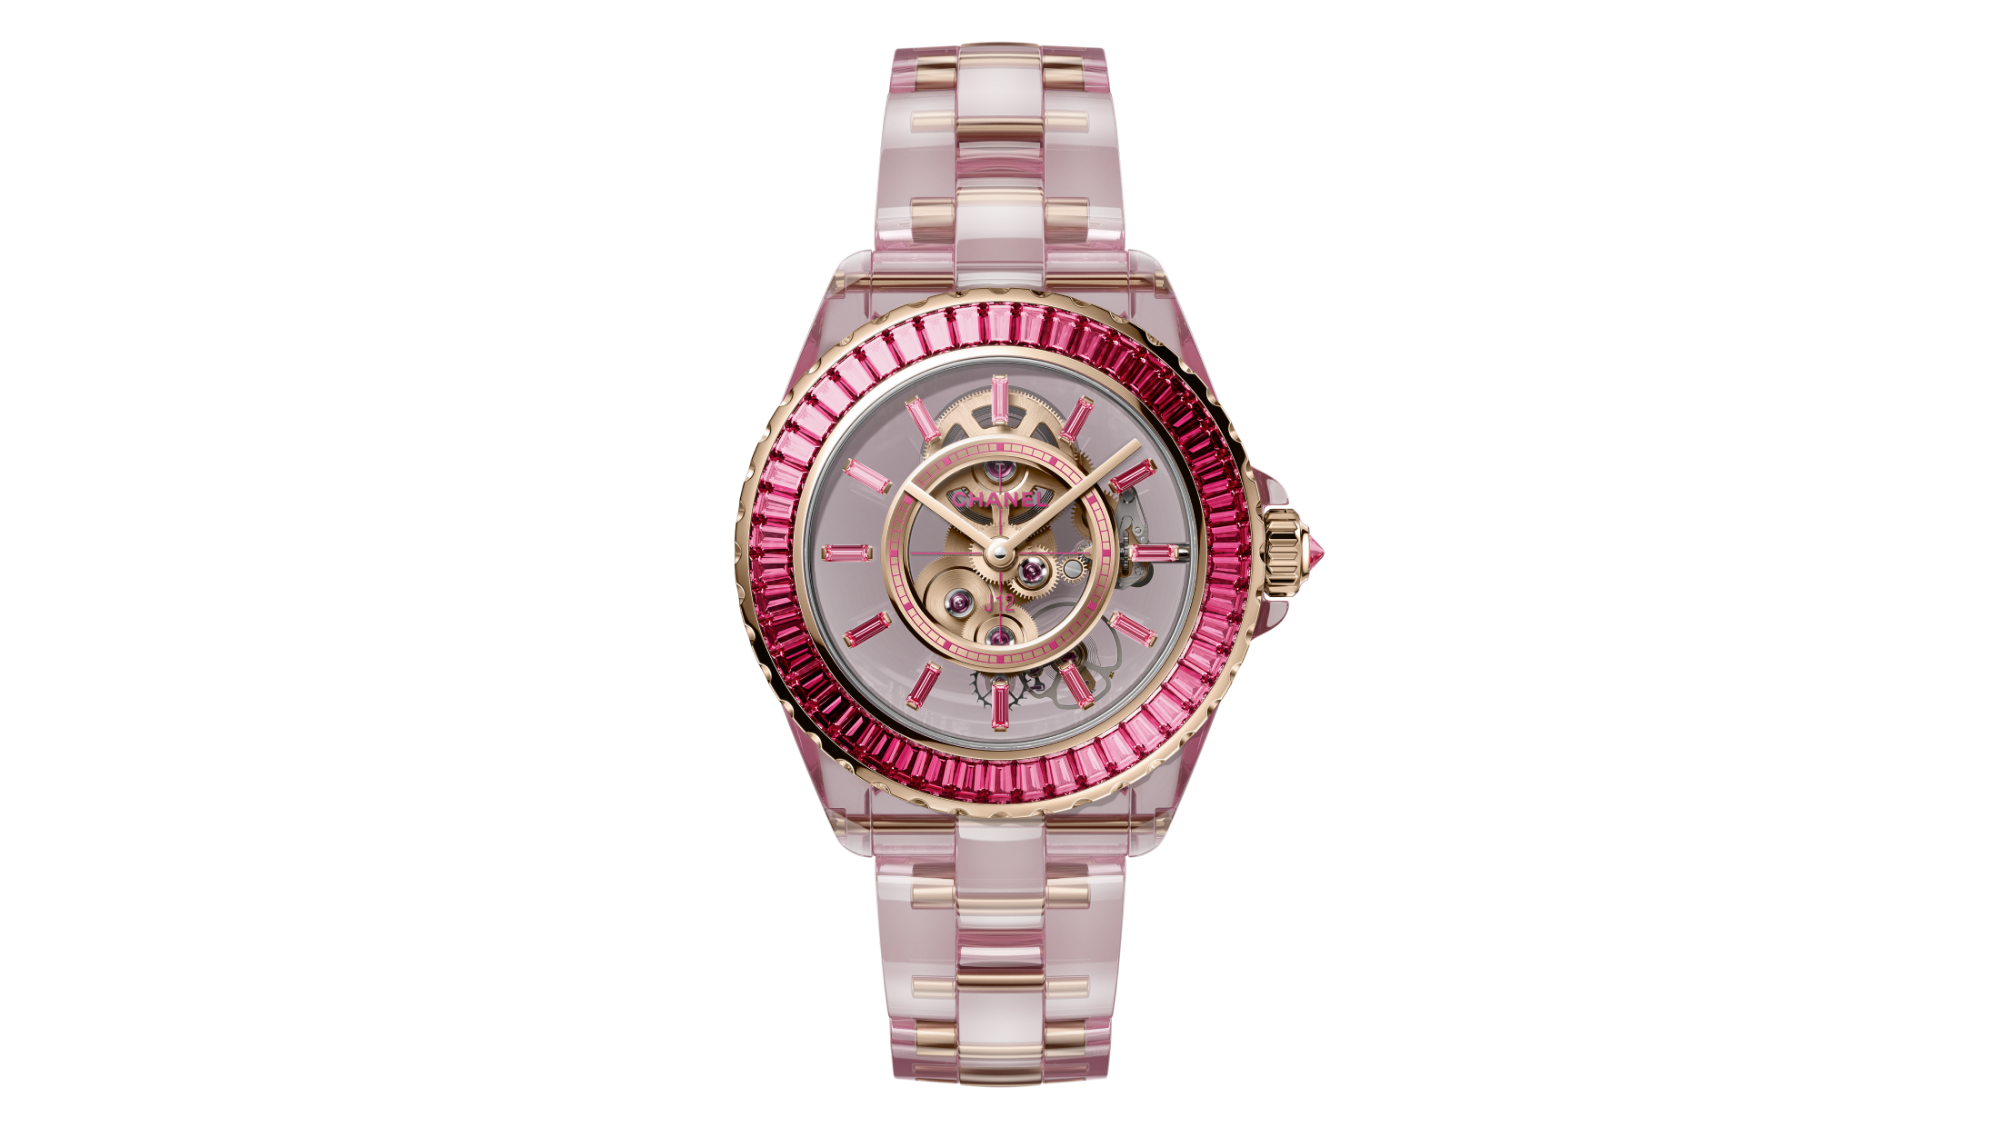 Pink edition of Chanel's J12 watch